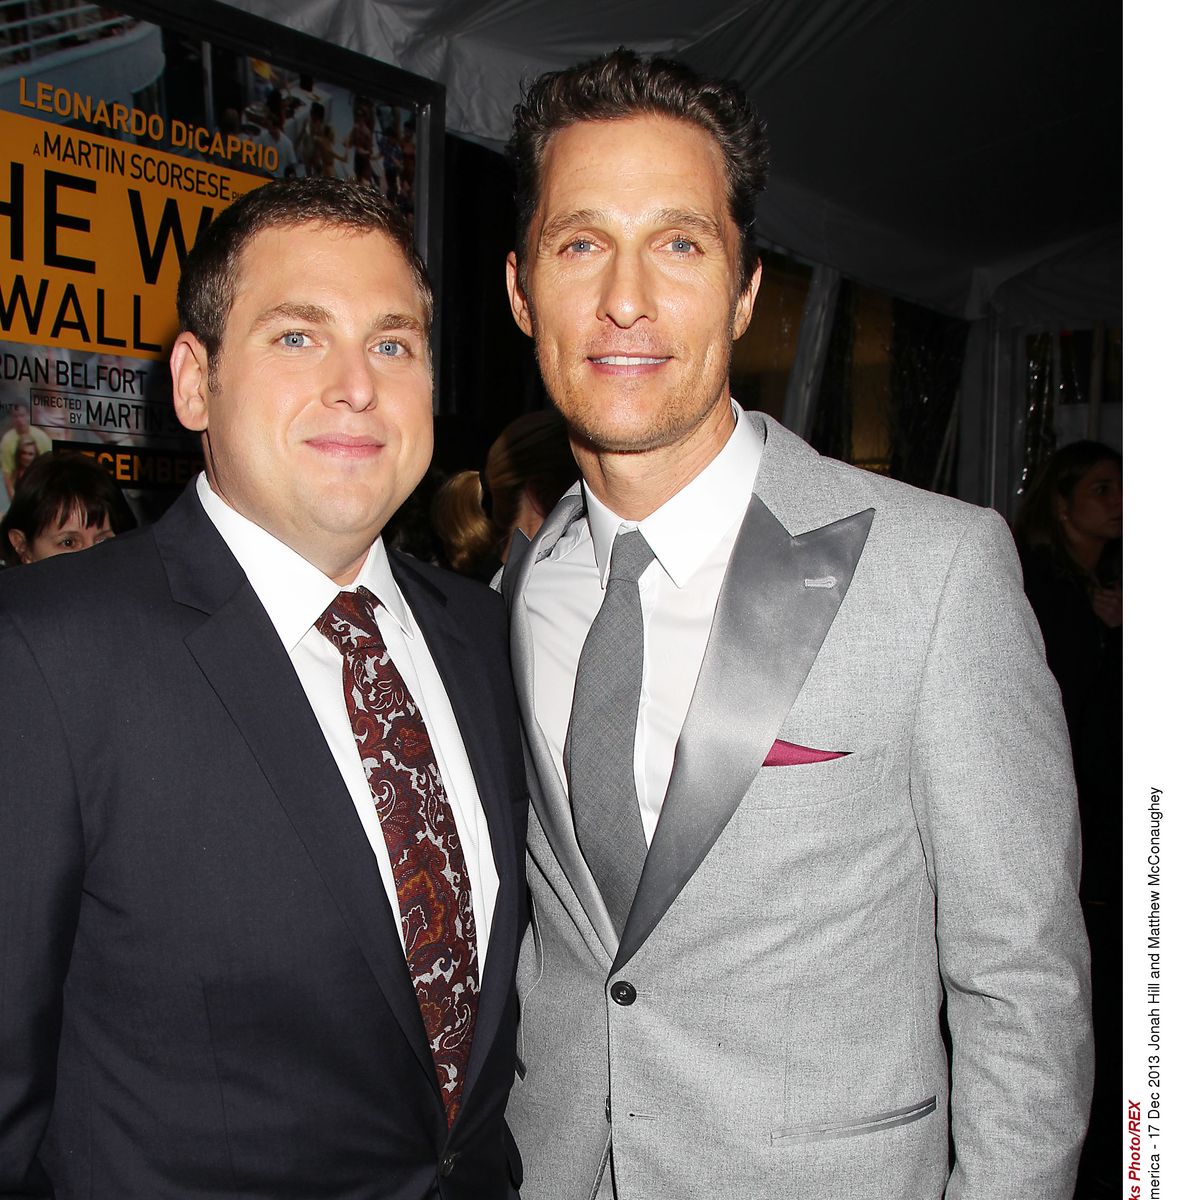 On the Red Carpet: Matthew McConaughey, Leonardo DiCaprio and…Adam Dunn?, by Chicago White Sox